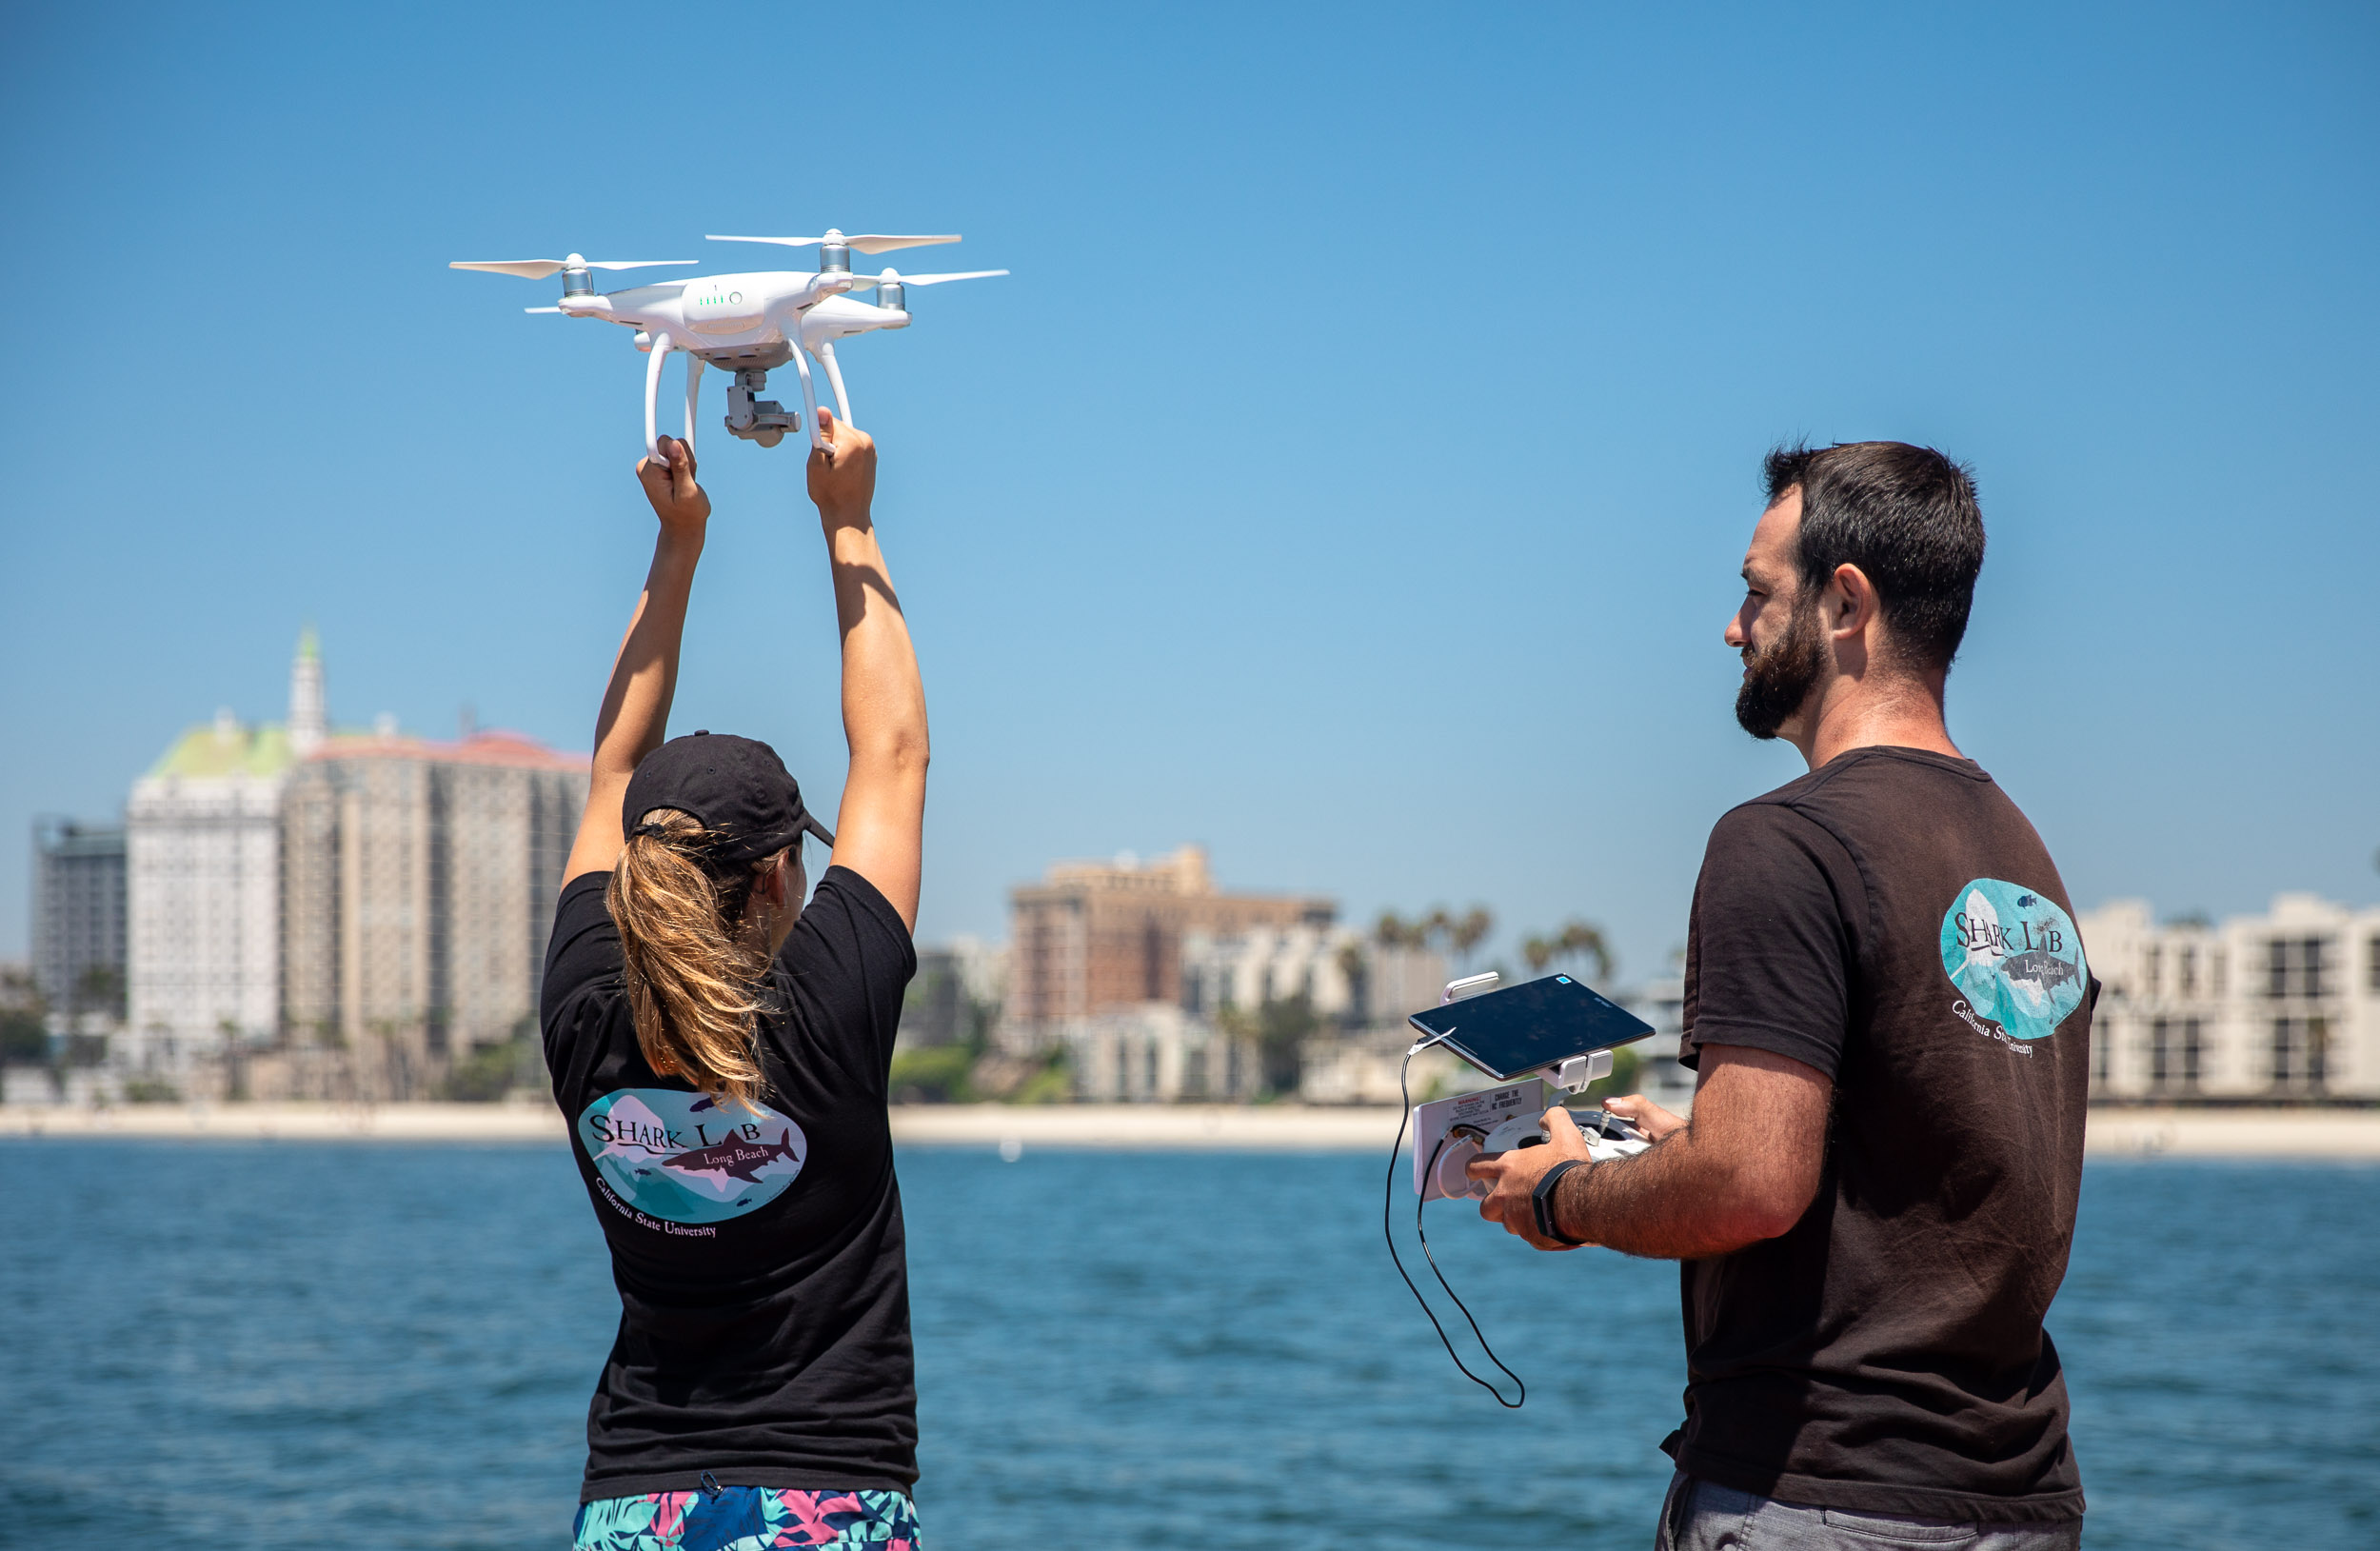 Shark lab students use drone